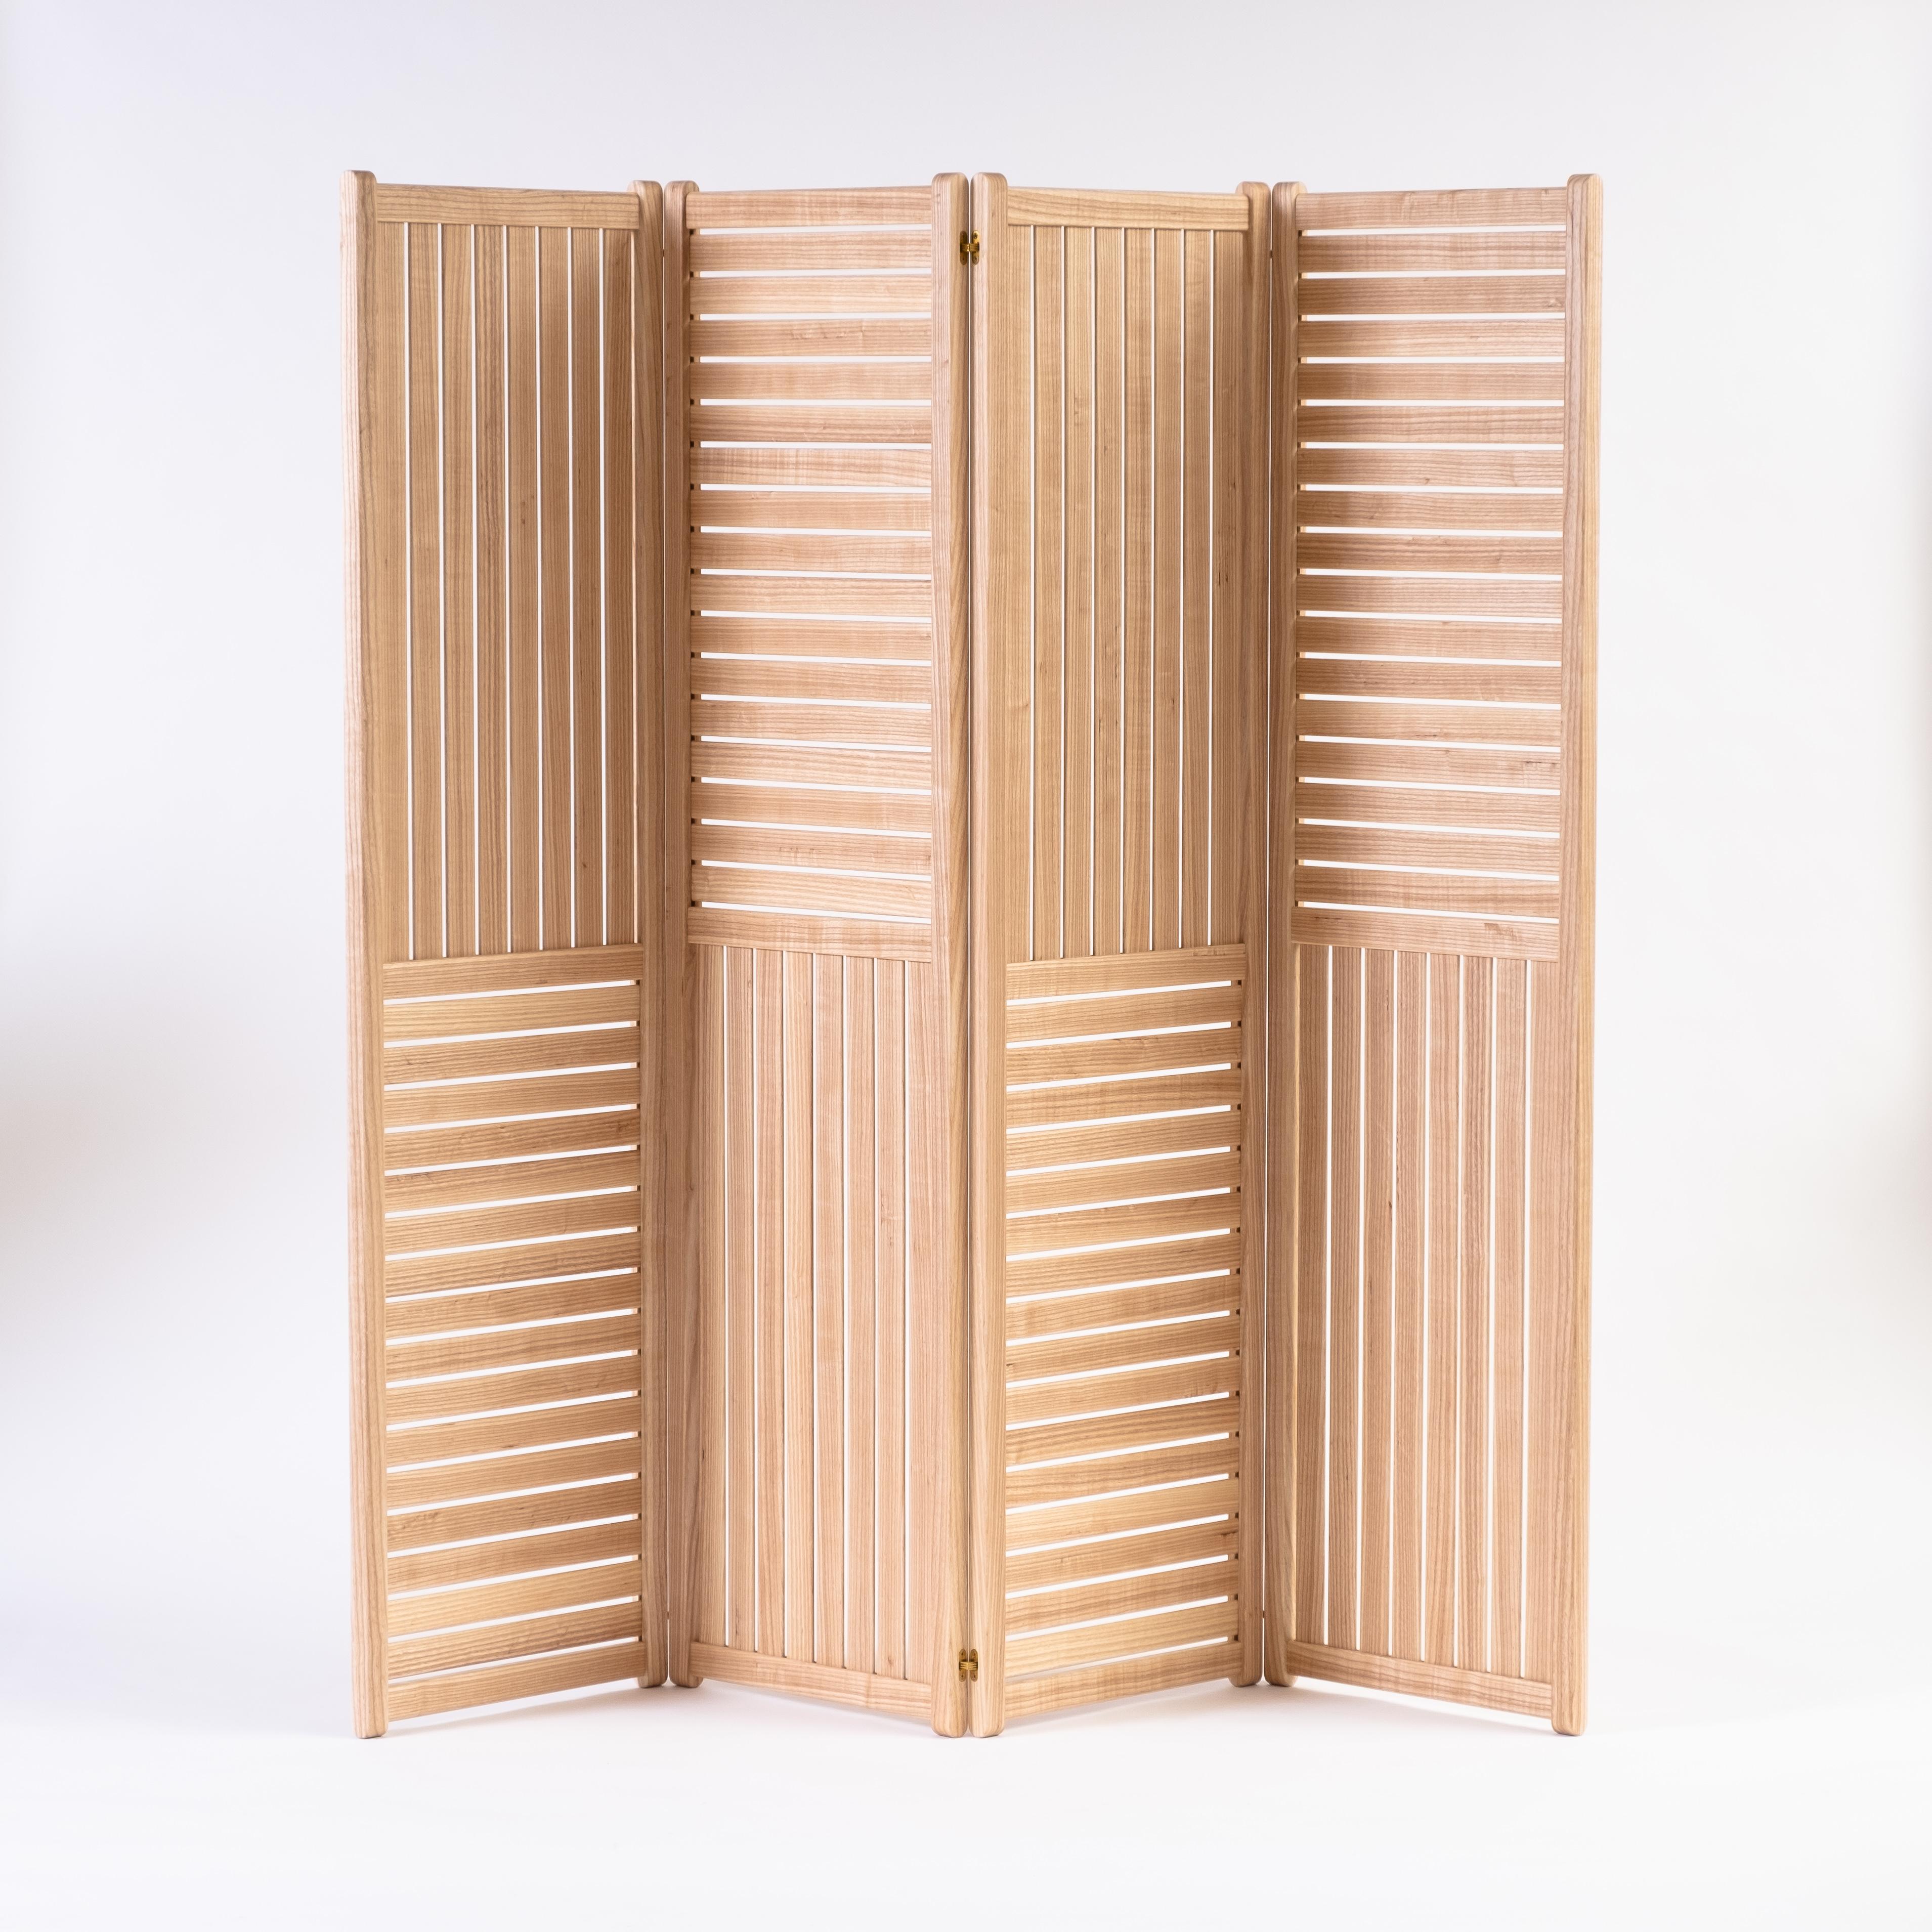 This folding screen / room divider uses repeating patterns of horizontal and vertical slats to create an object that is both functional and visually interesting.

The screen can be used as a purely decorative object, adding texture and movement to